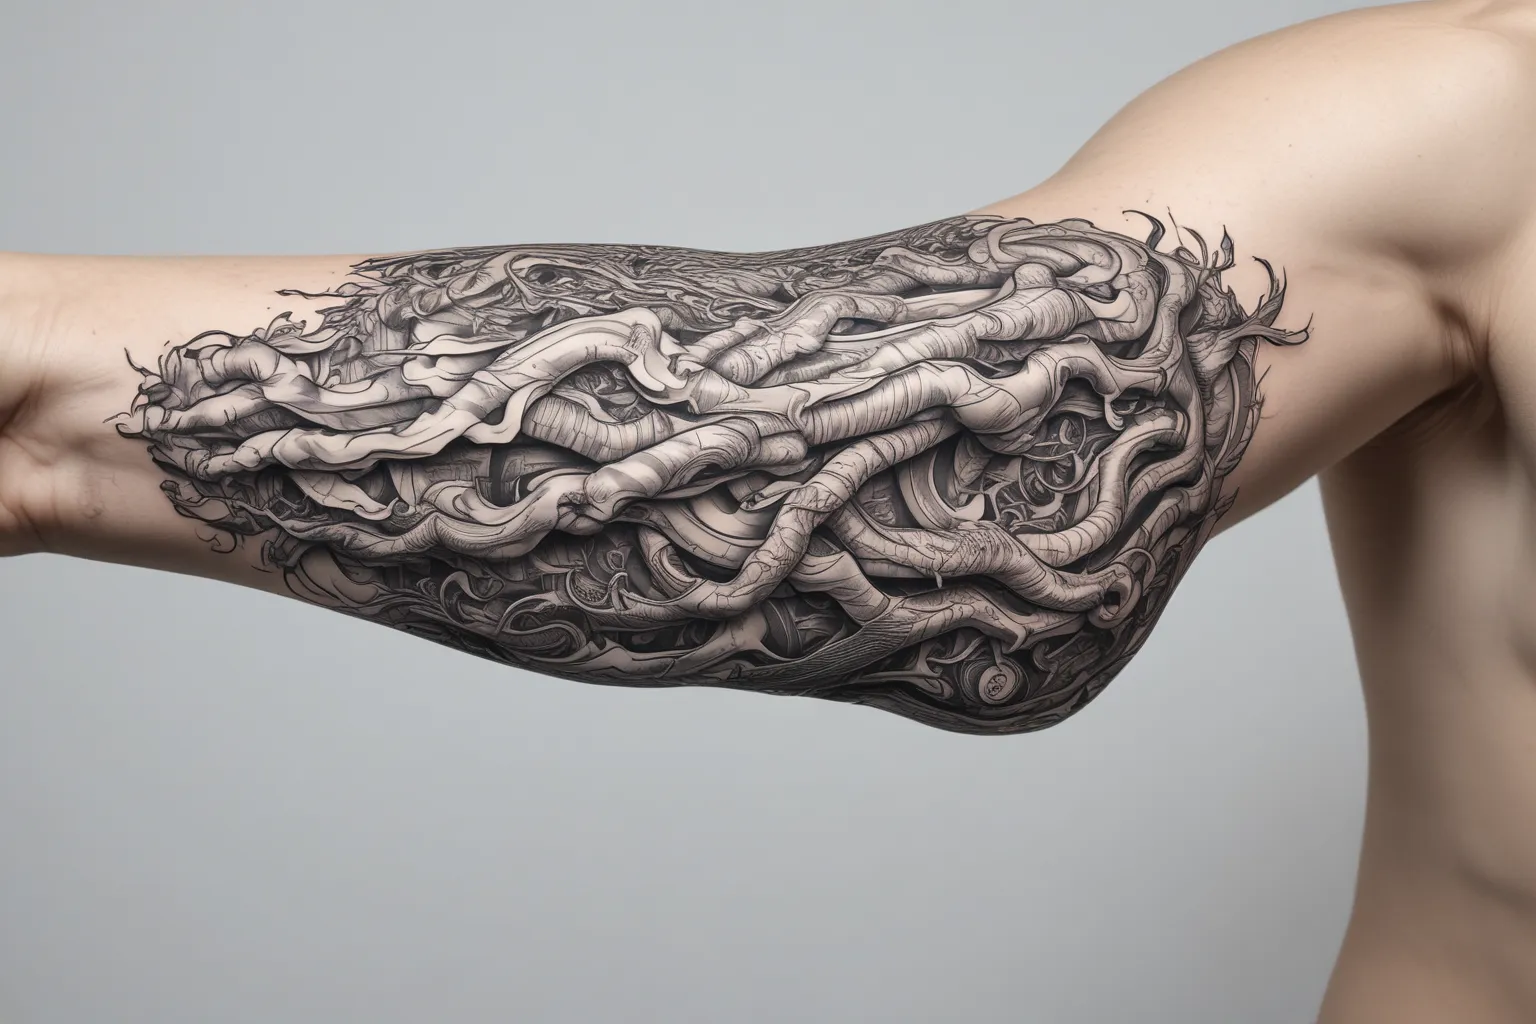 inner elbow crook of the arm ,a vein tattoo of the basilic mcephalic and median cubicle veins in 3d effect tatuaż